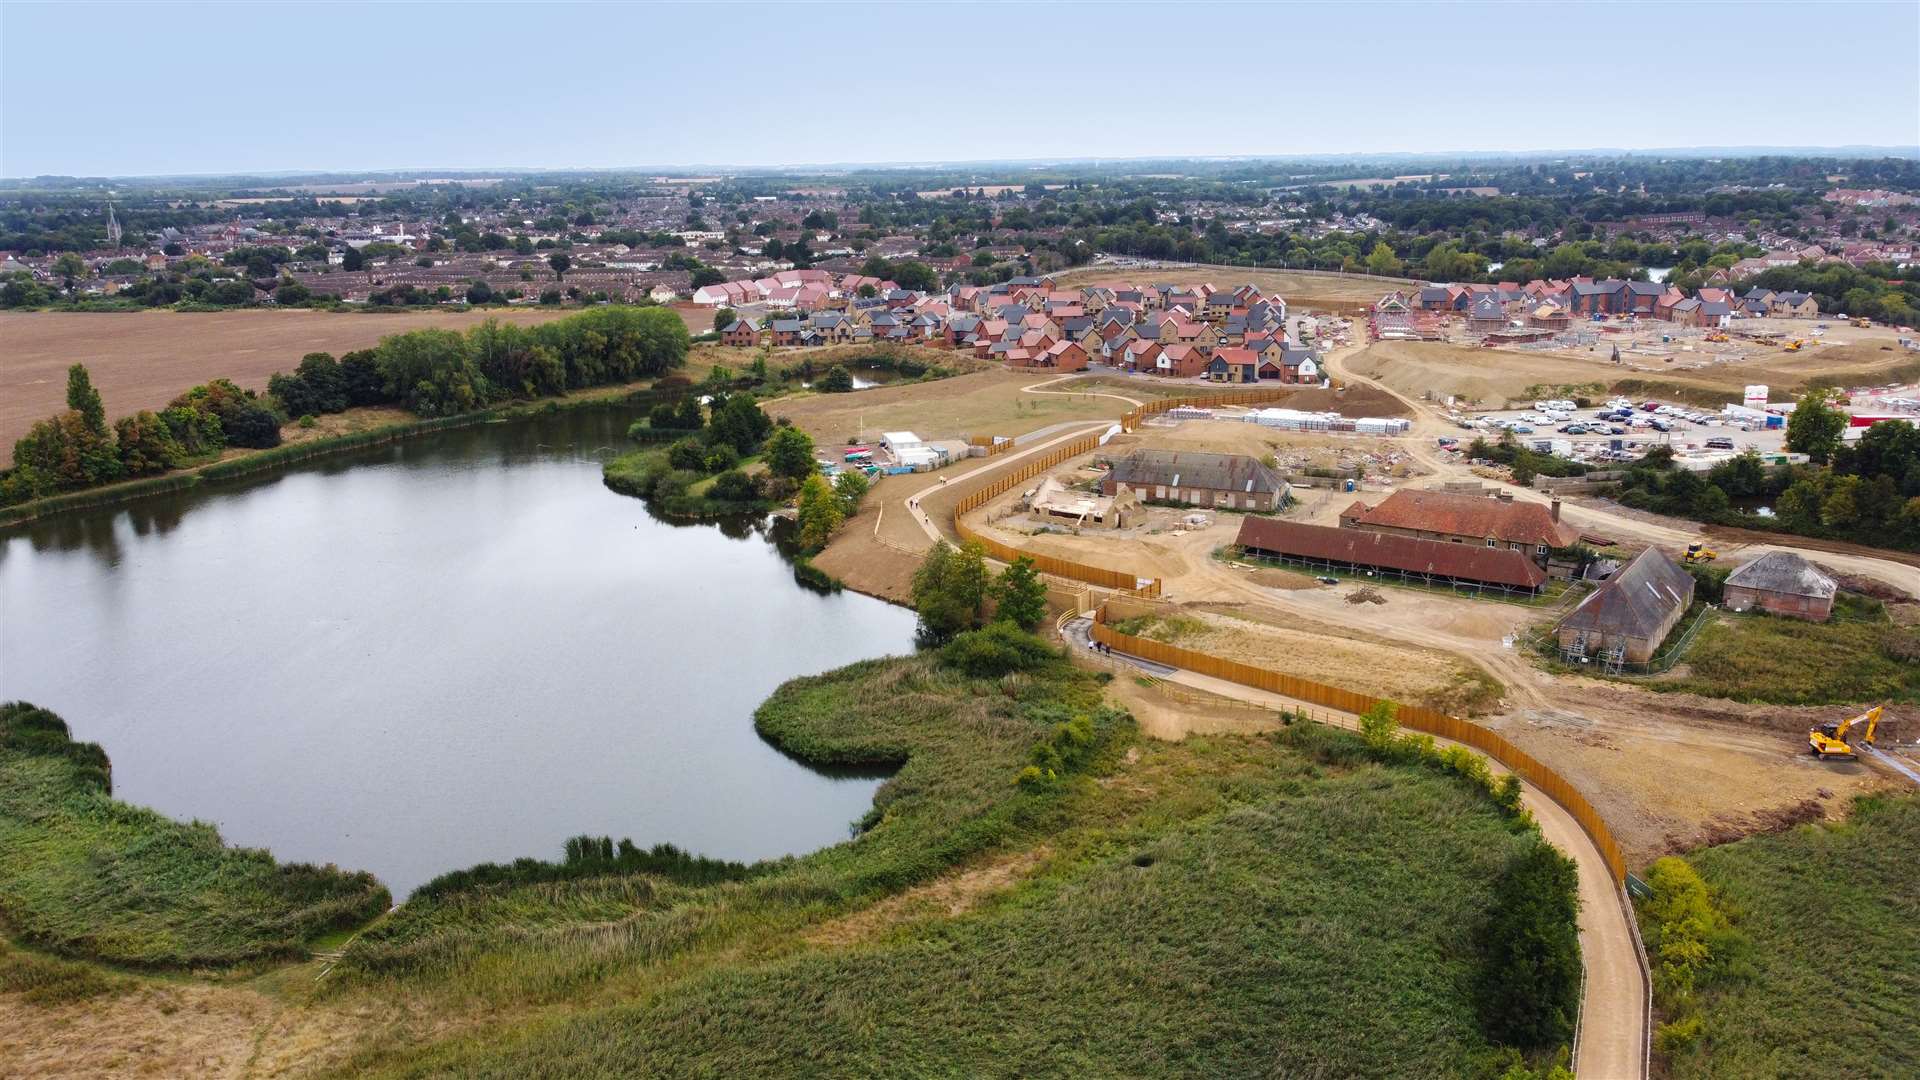 An aerial view of the Faversham Lakes estate. Photo: Andersons Group